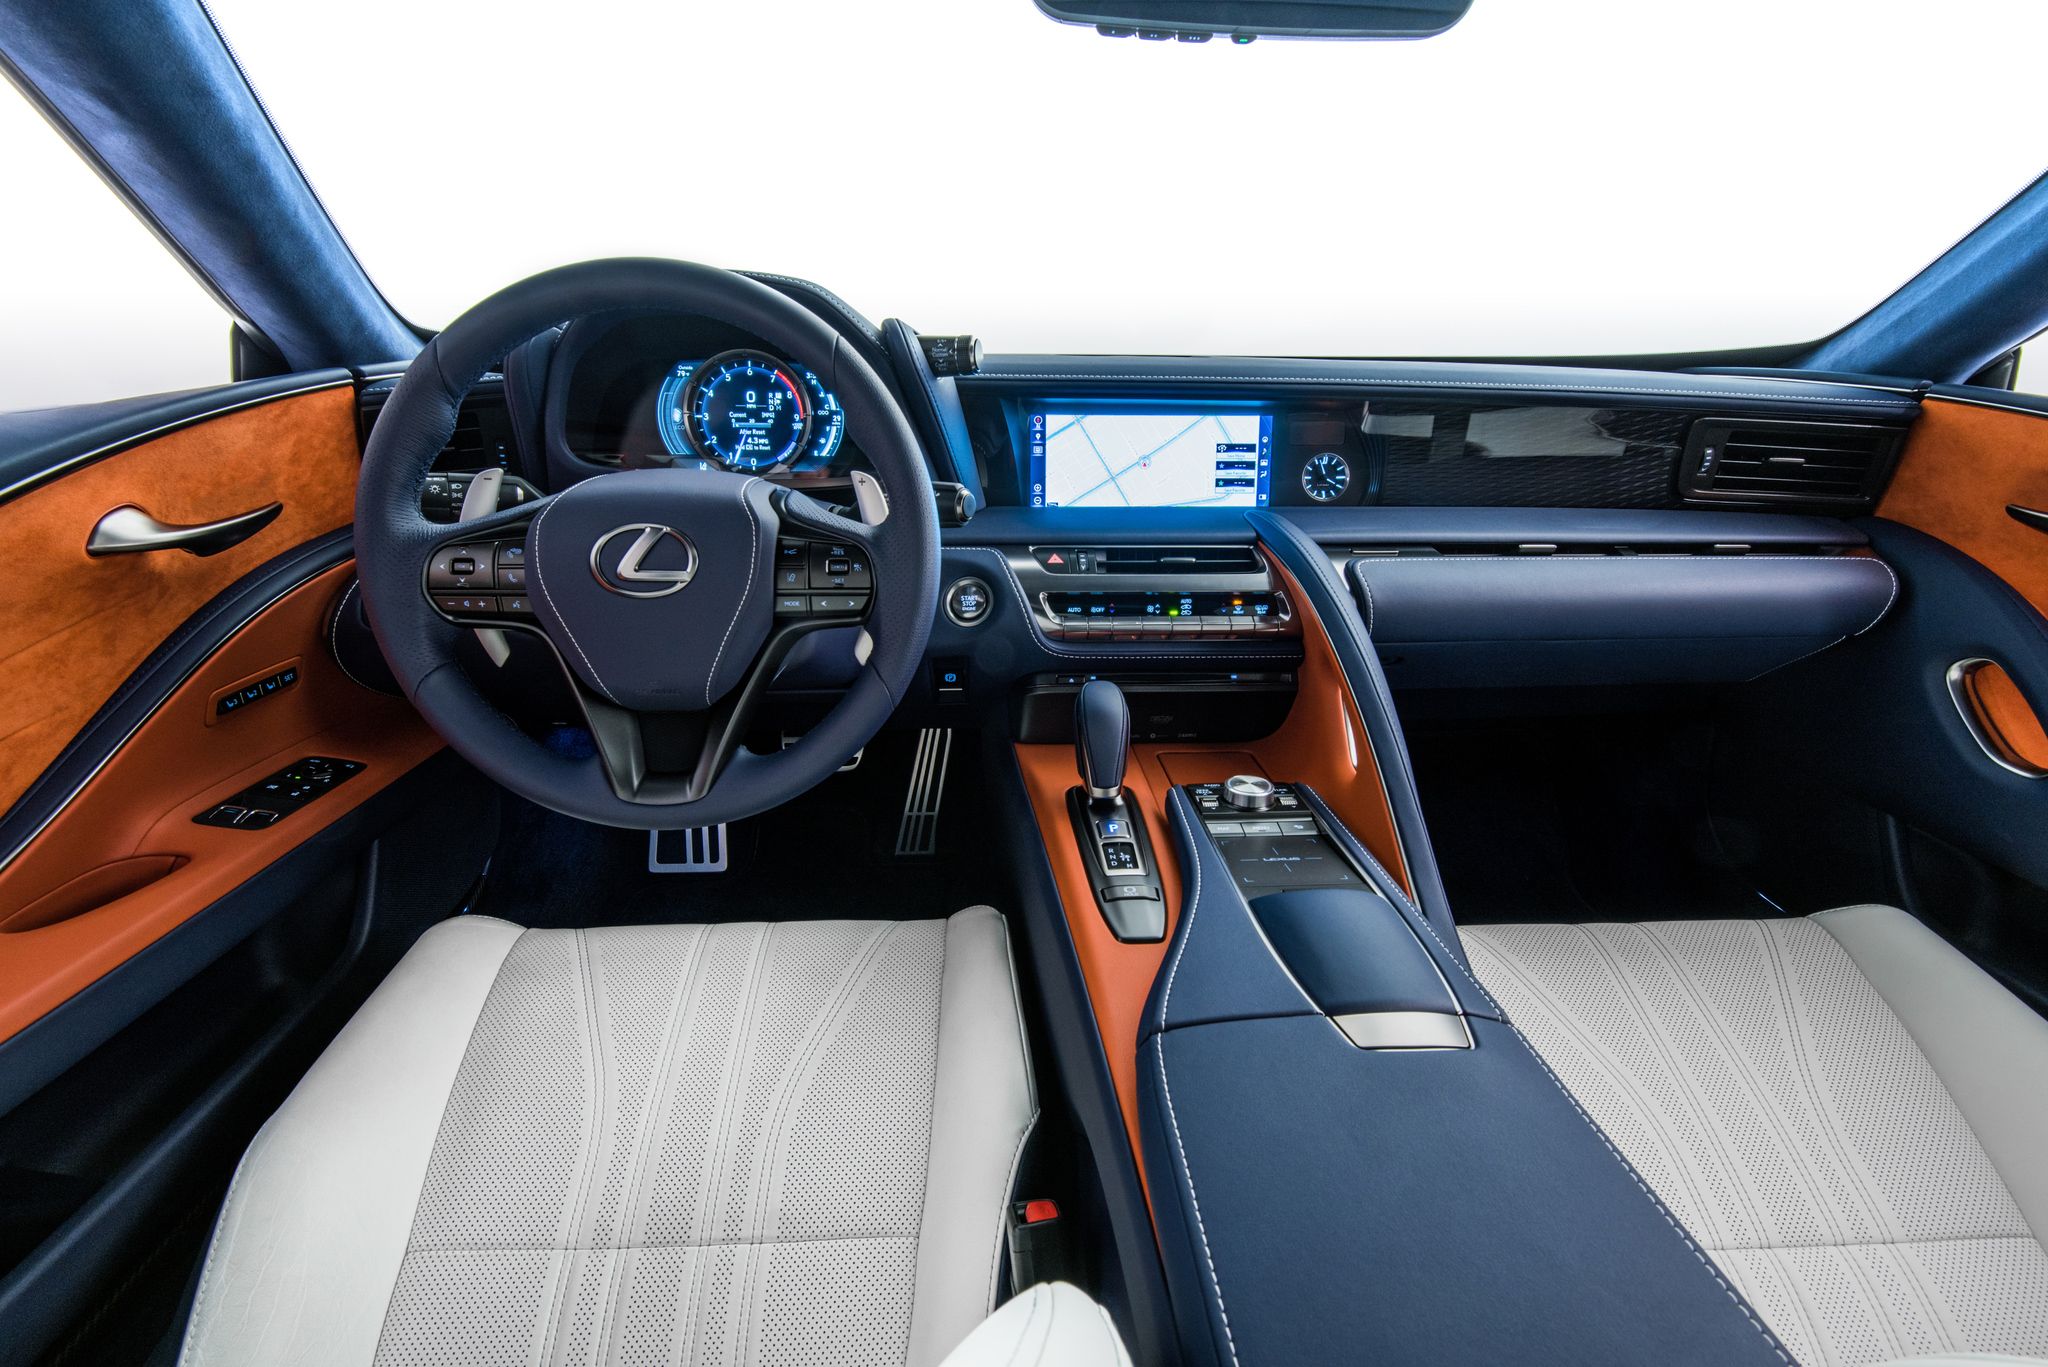 2018 Lexus Lc500 Essentials In A Love Like Relationship